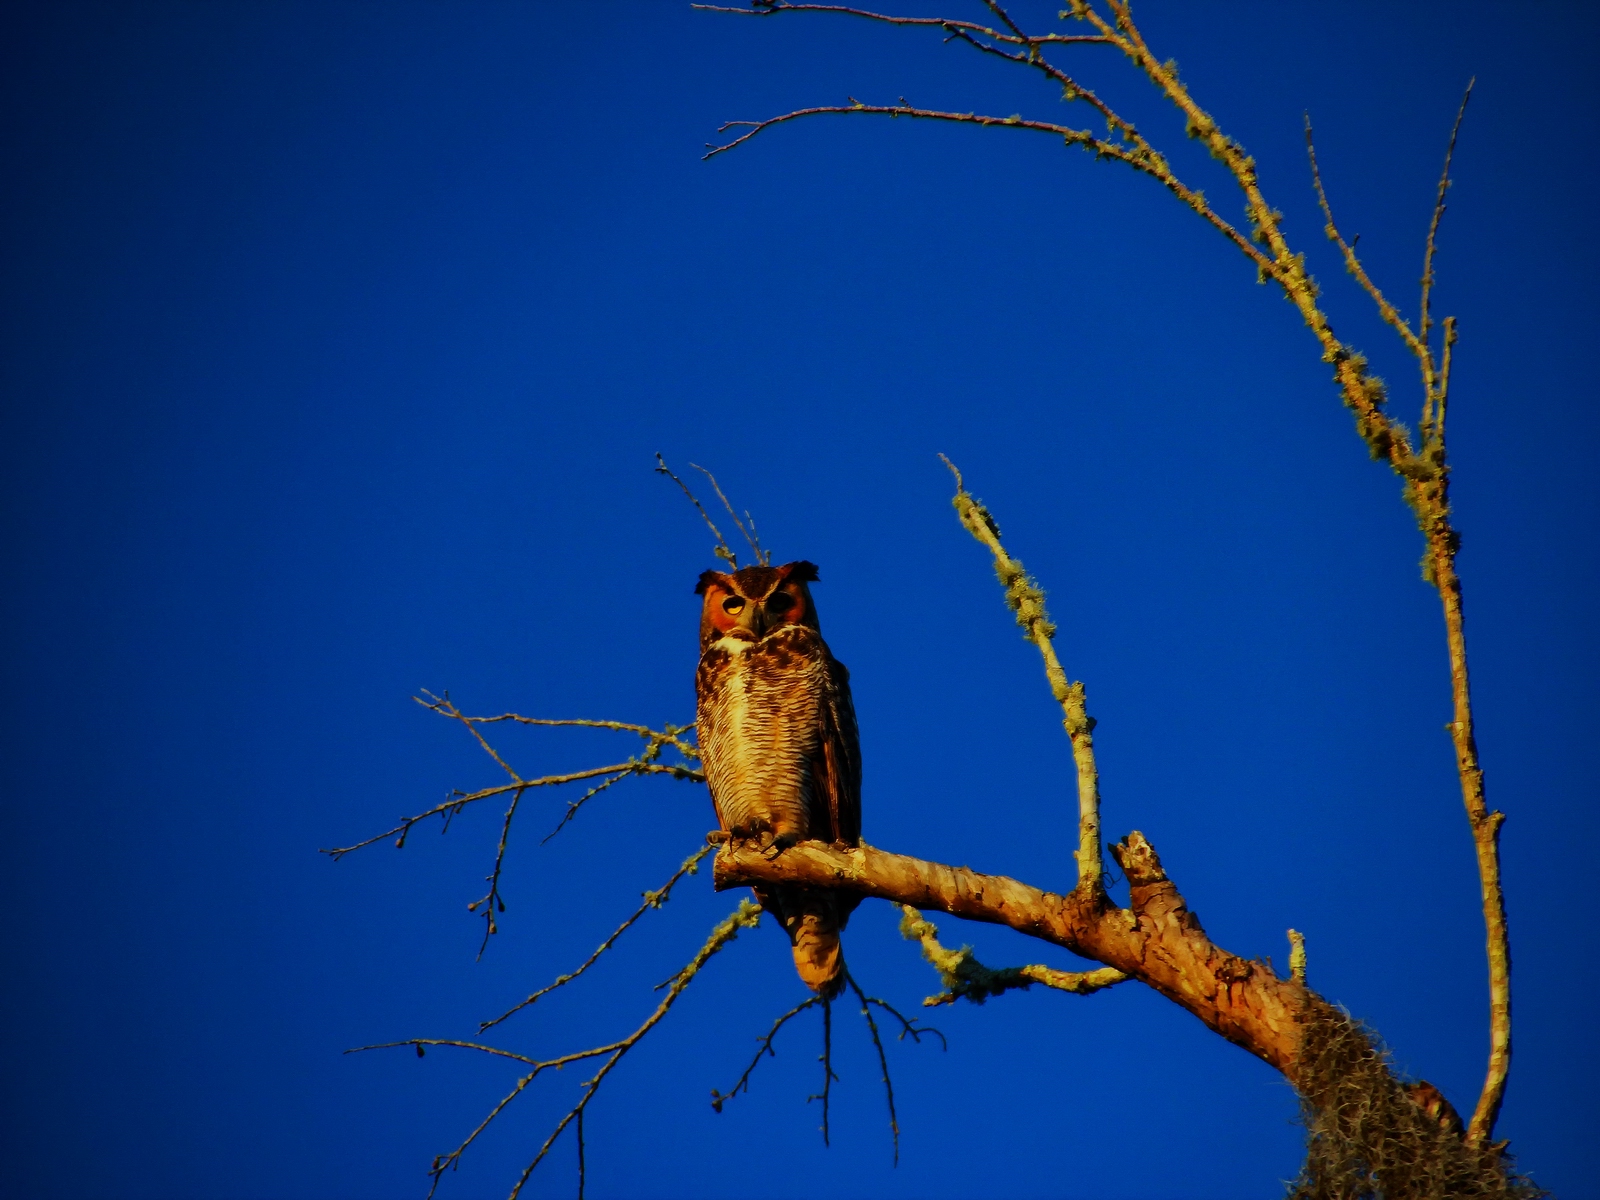 Facing West towards the setting sun his majestic hoot and presence honored the moment.